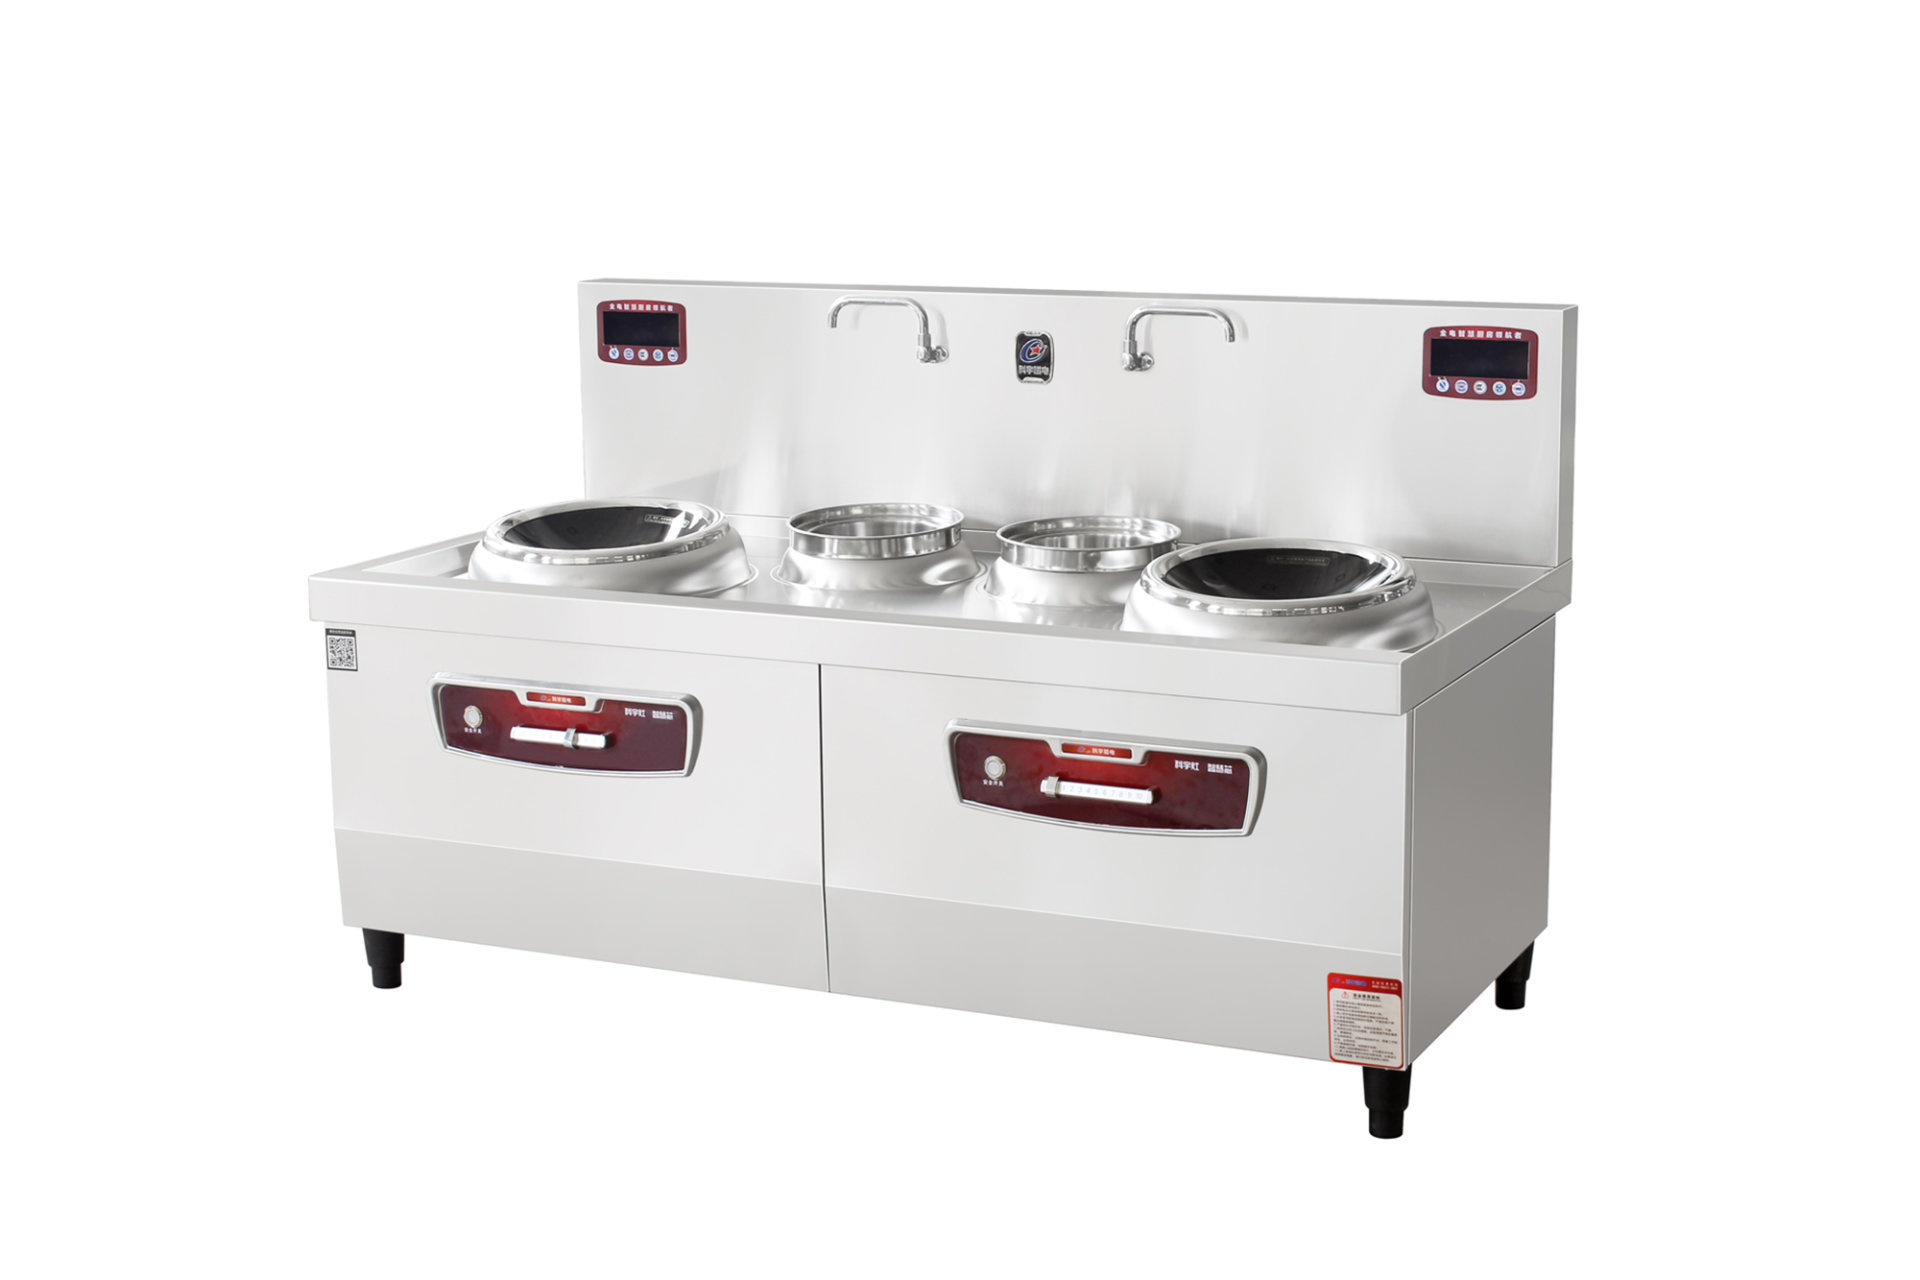 Zhidian model electromagnetic double frying and double temperature